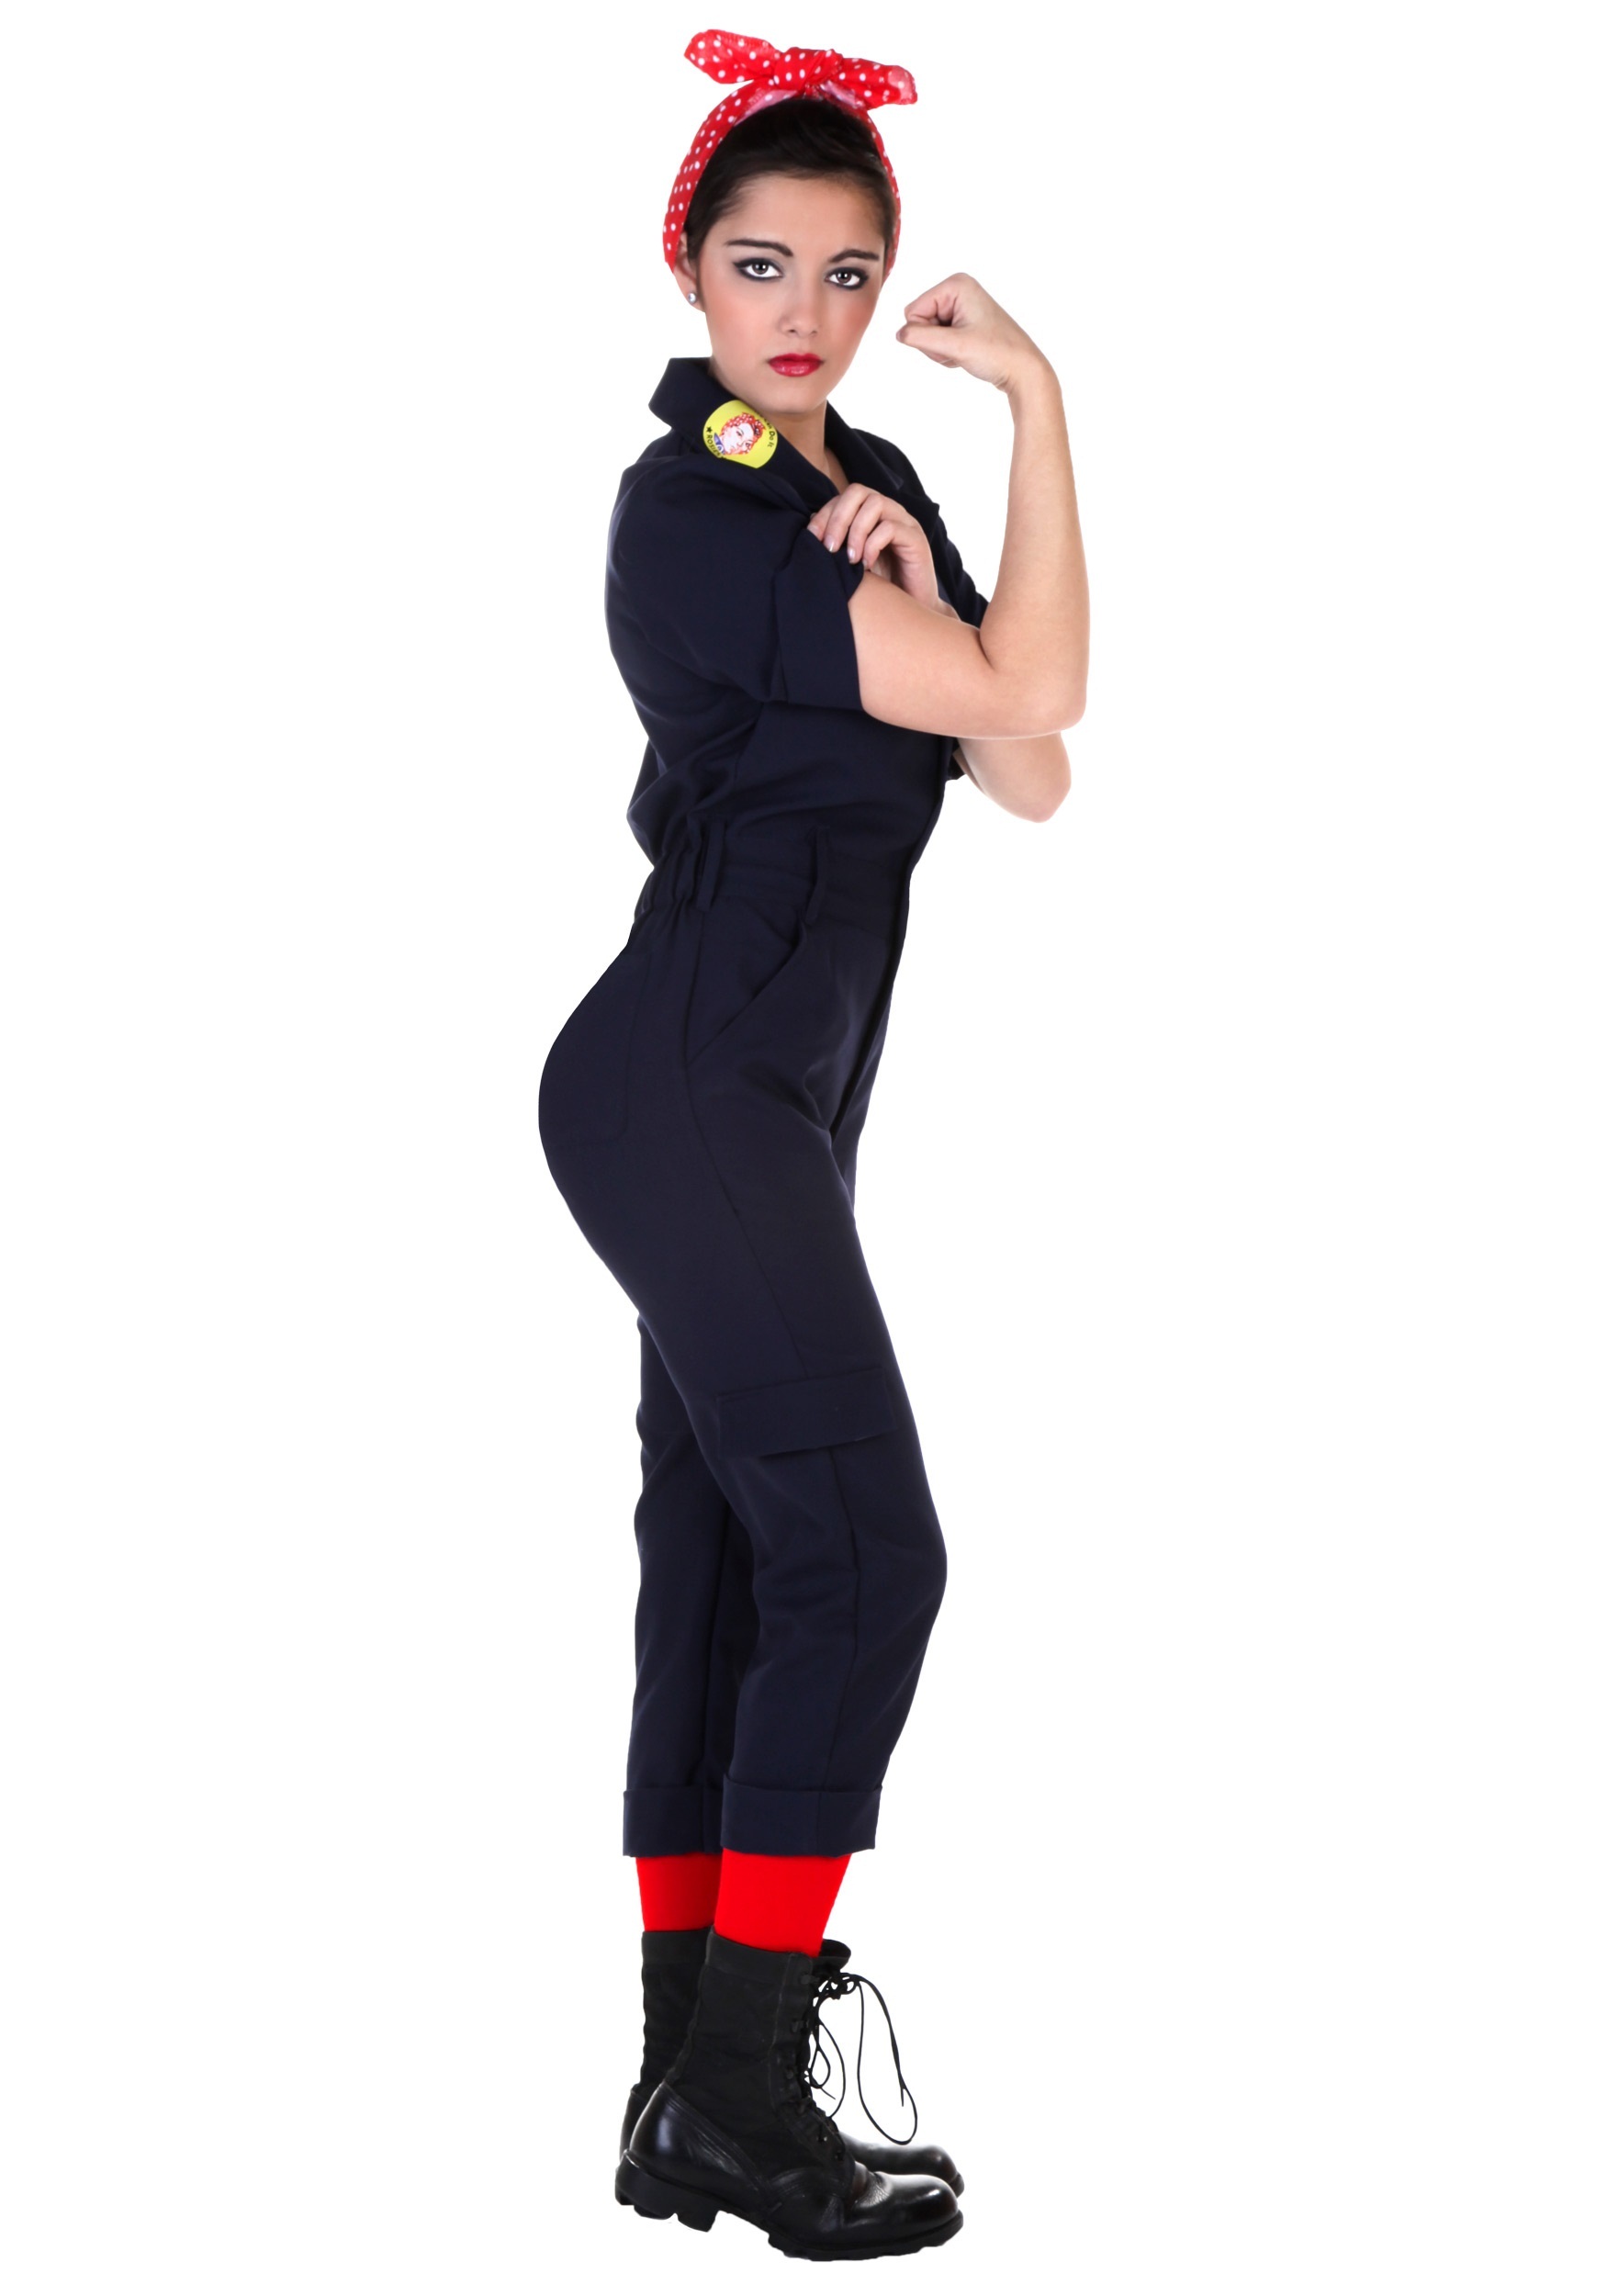 1940s Costumes- WWII, Nurse, Pinup, Rosie the Riveter Womens Plus Size Hardworking Lady Costume $59.99 AT vintagedancer.com